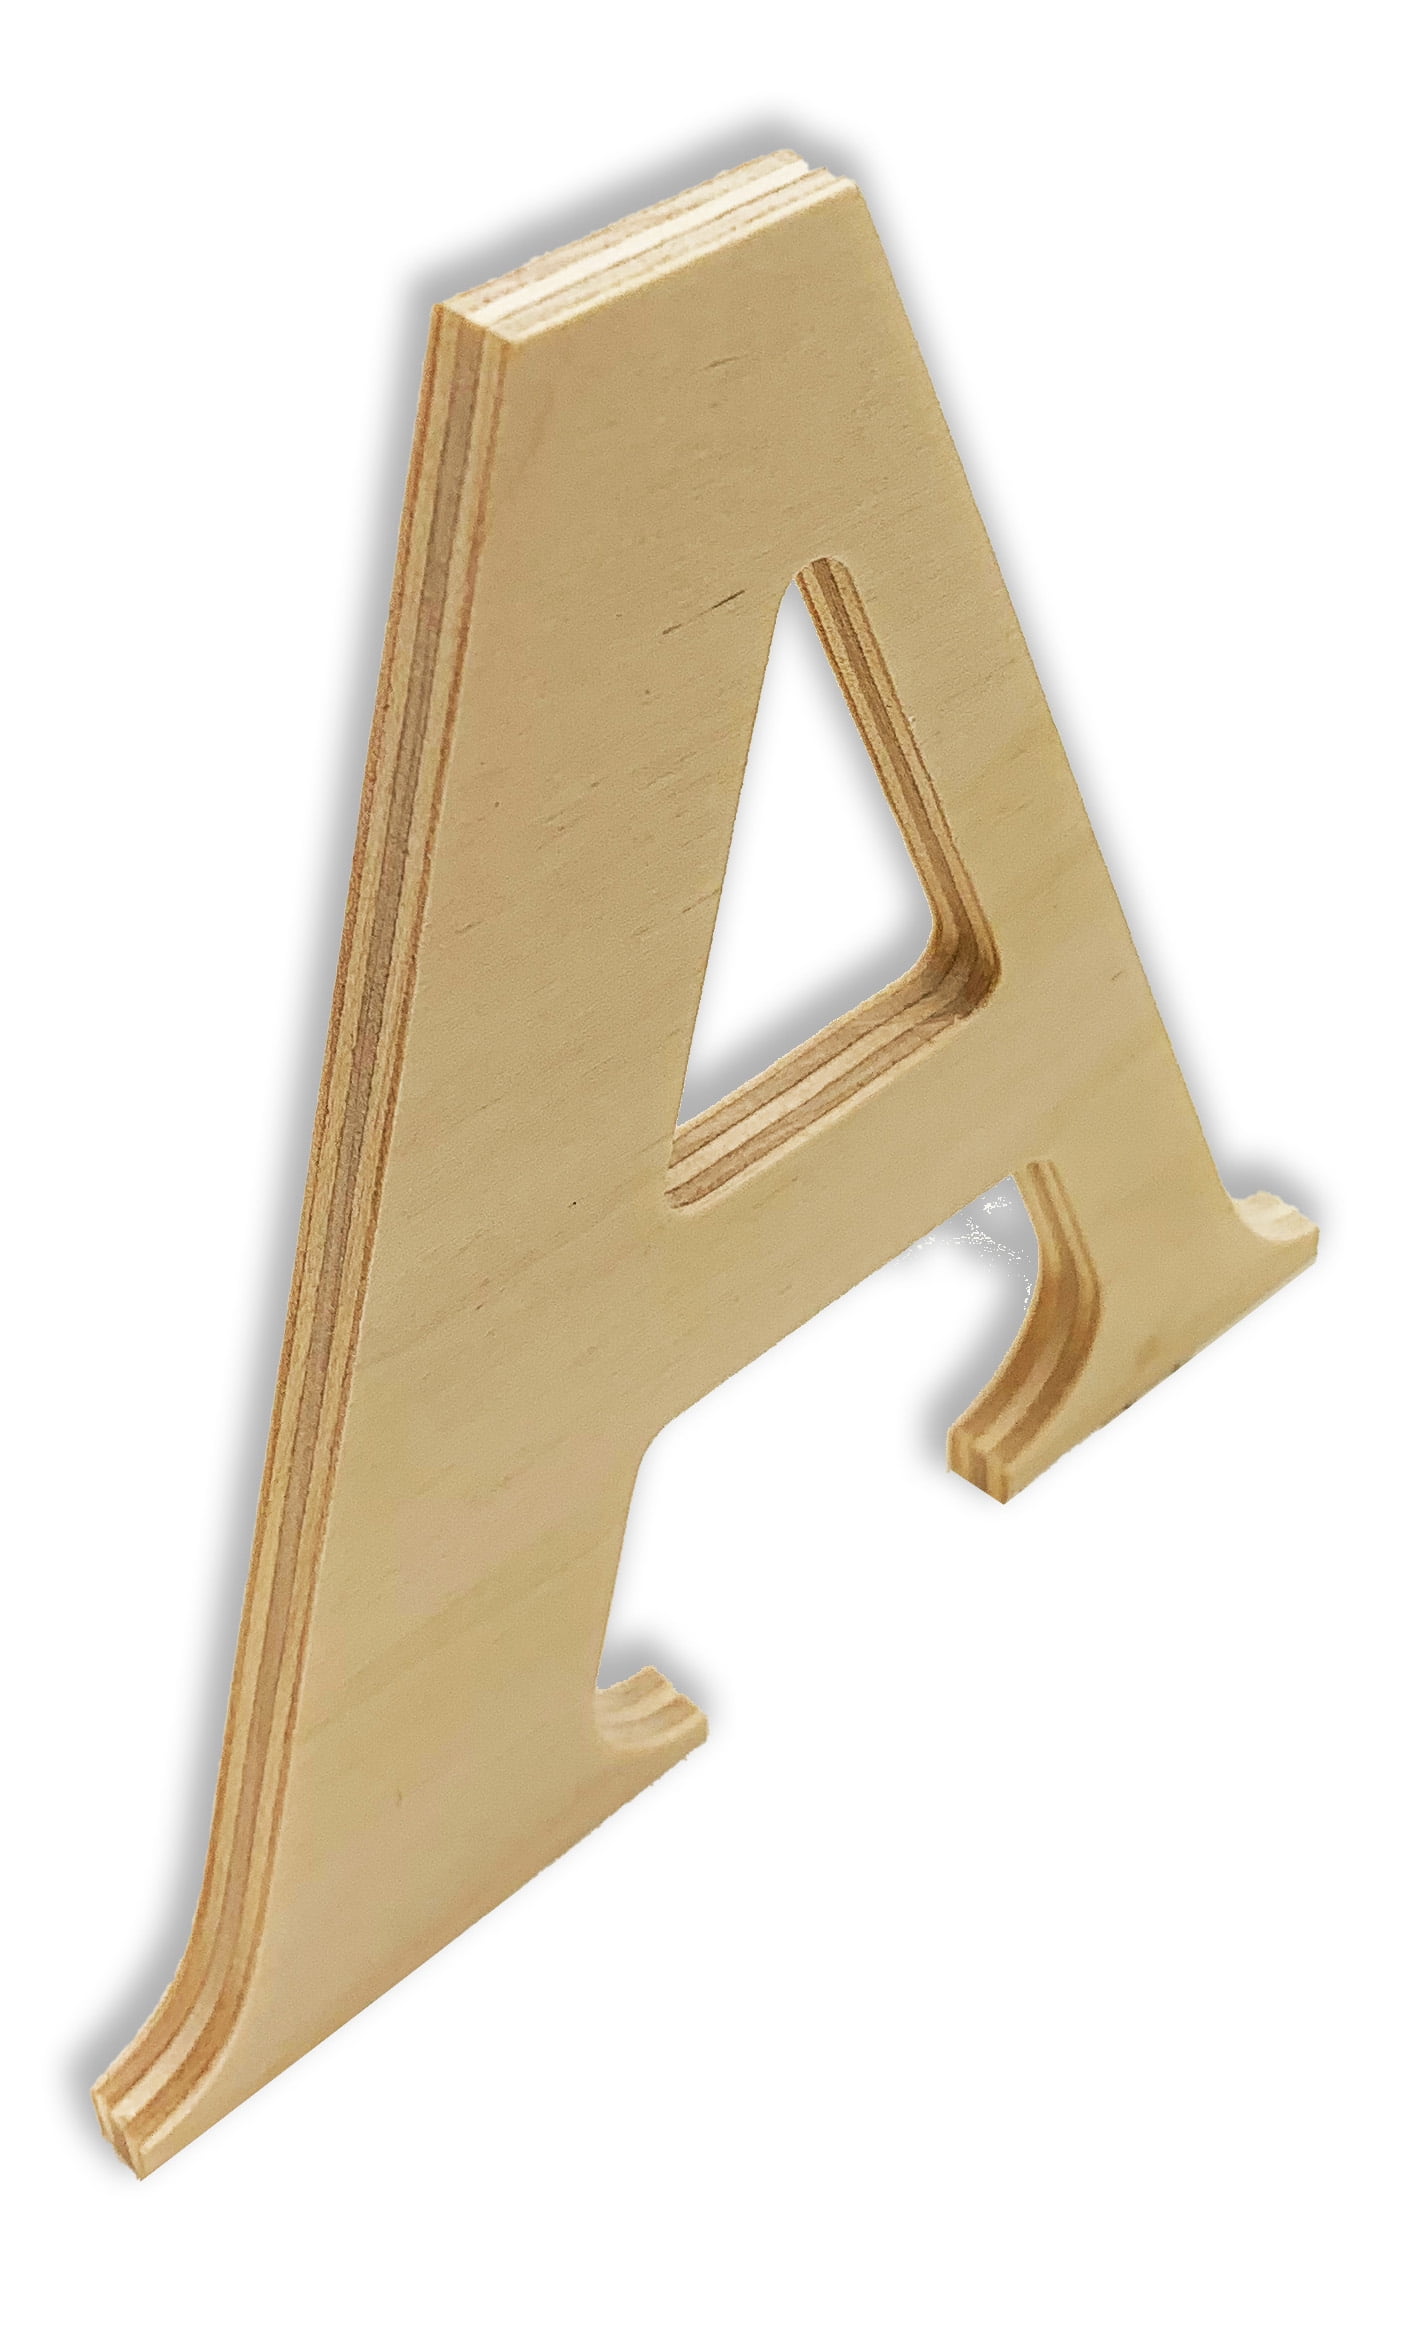 4 Inch Wooden Letter T - Cut from Baltic Birch Plywood, This 4 inch Wood  Letter is Ready for Painting or Decorating. for Home Decor, Office Signs,  or